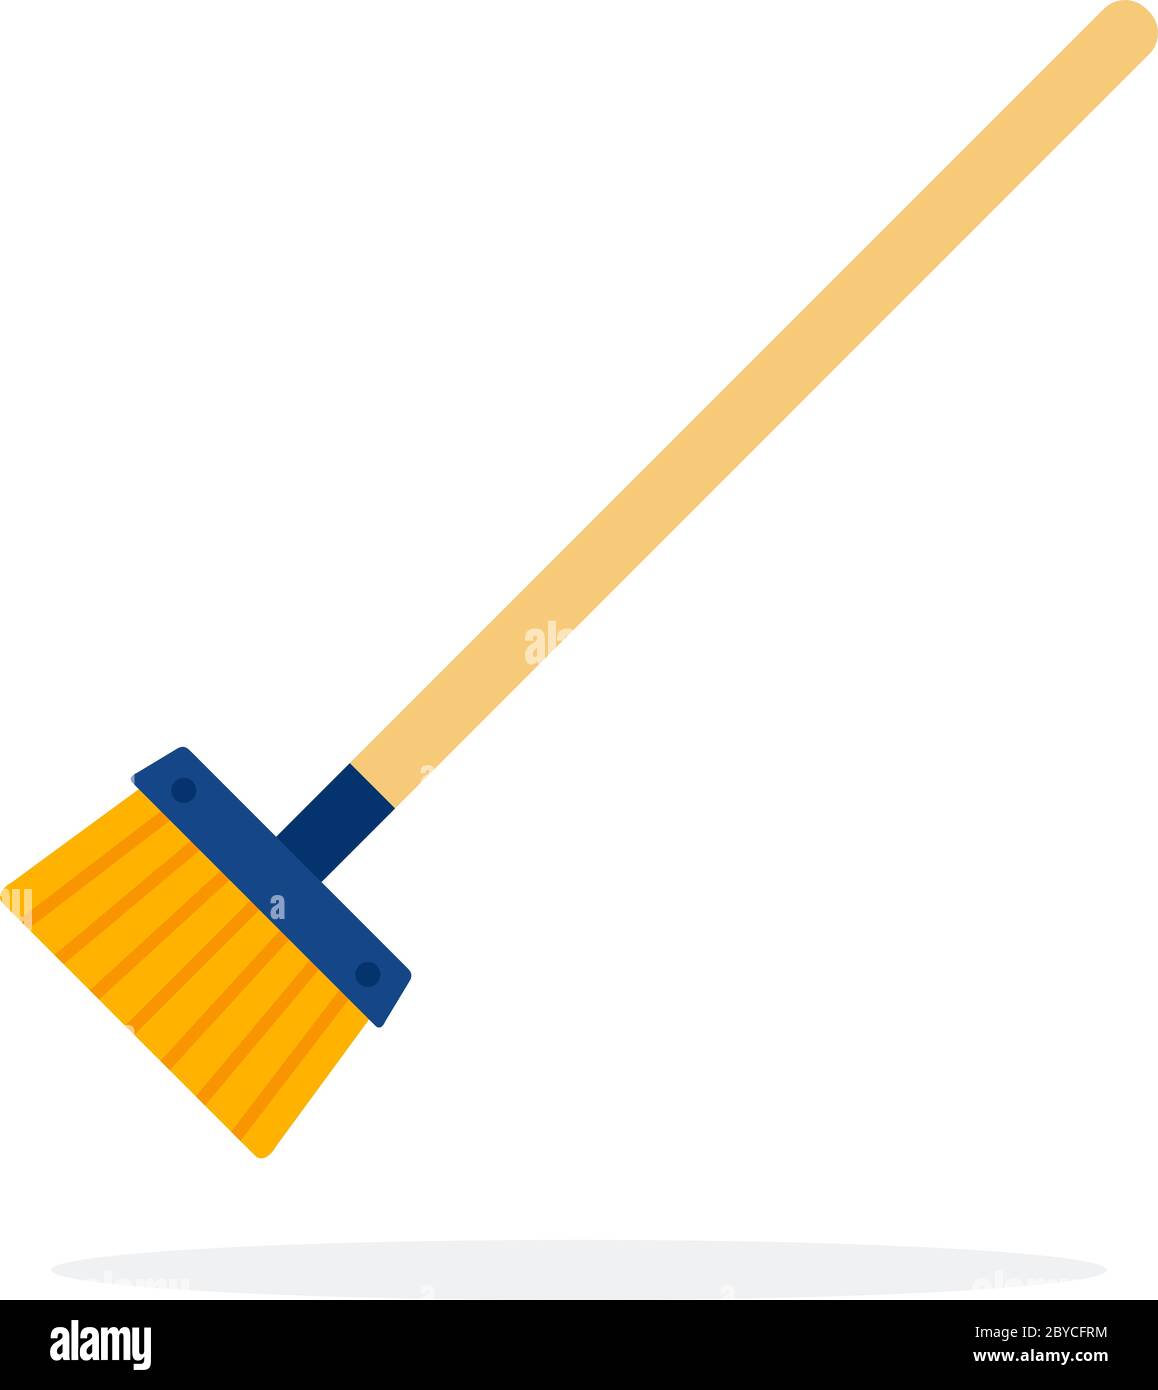 Brush for cleaning with large bristles flat isolated Stock Vector